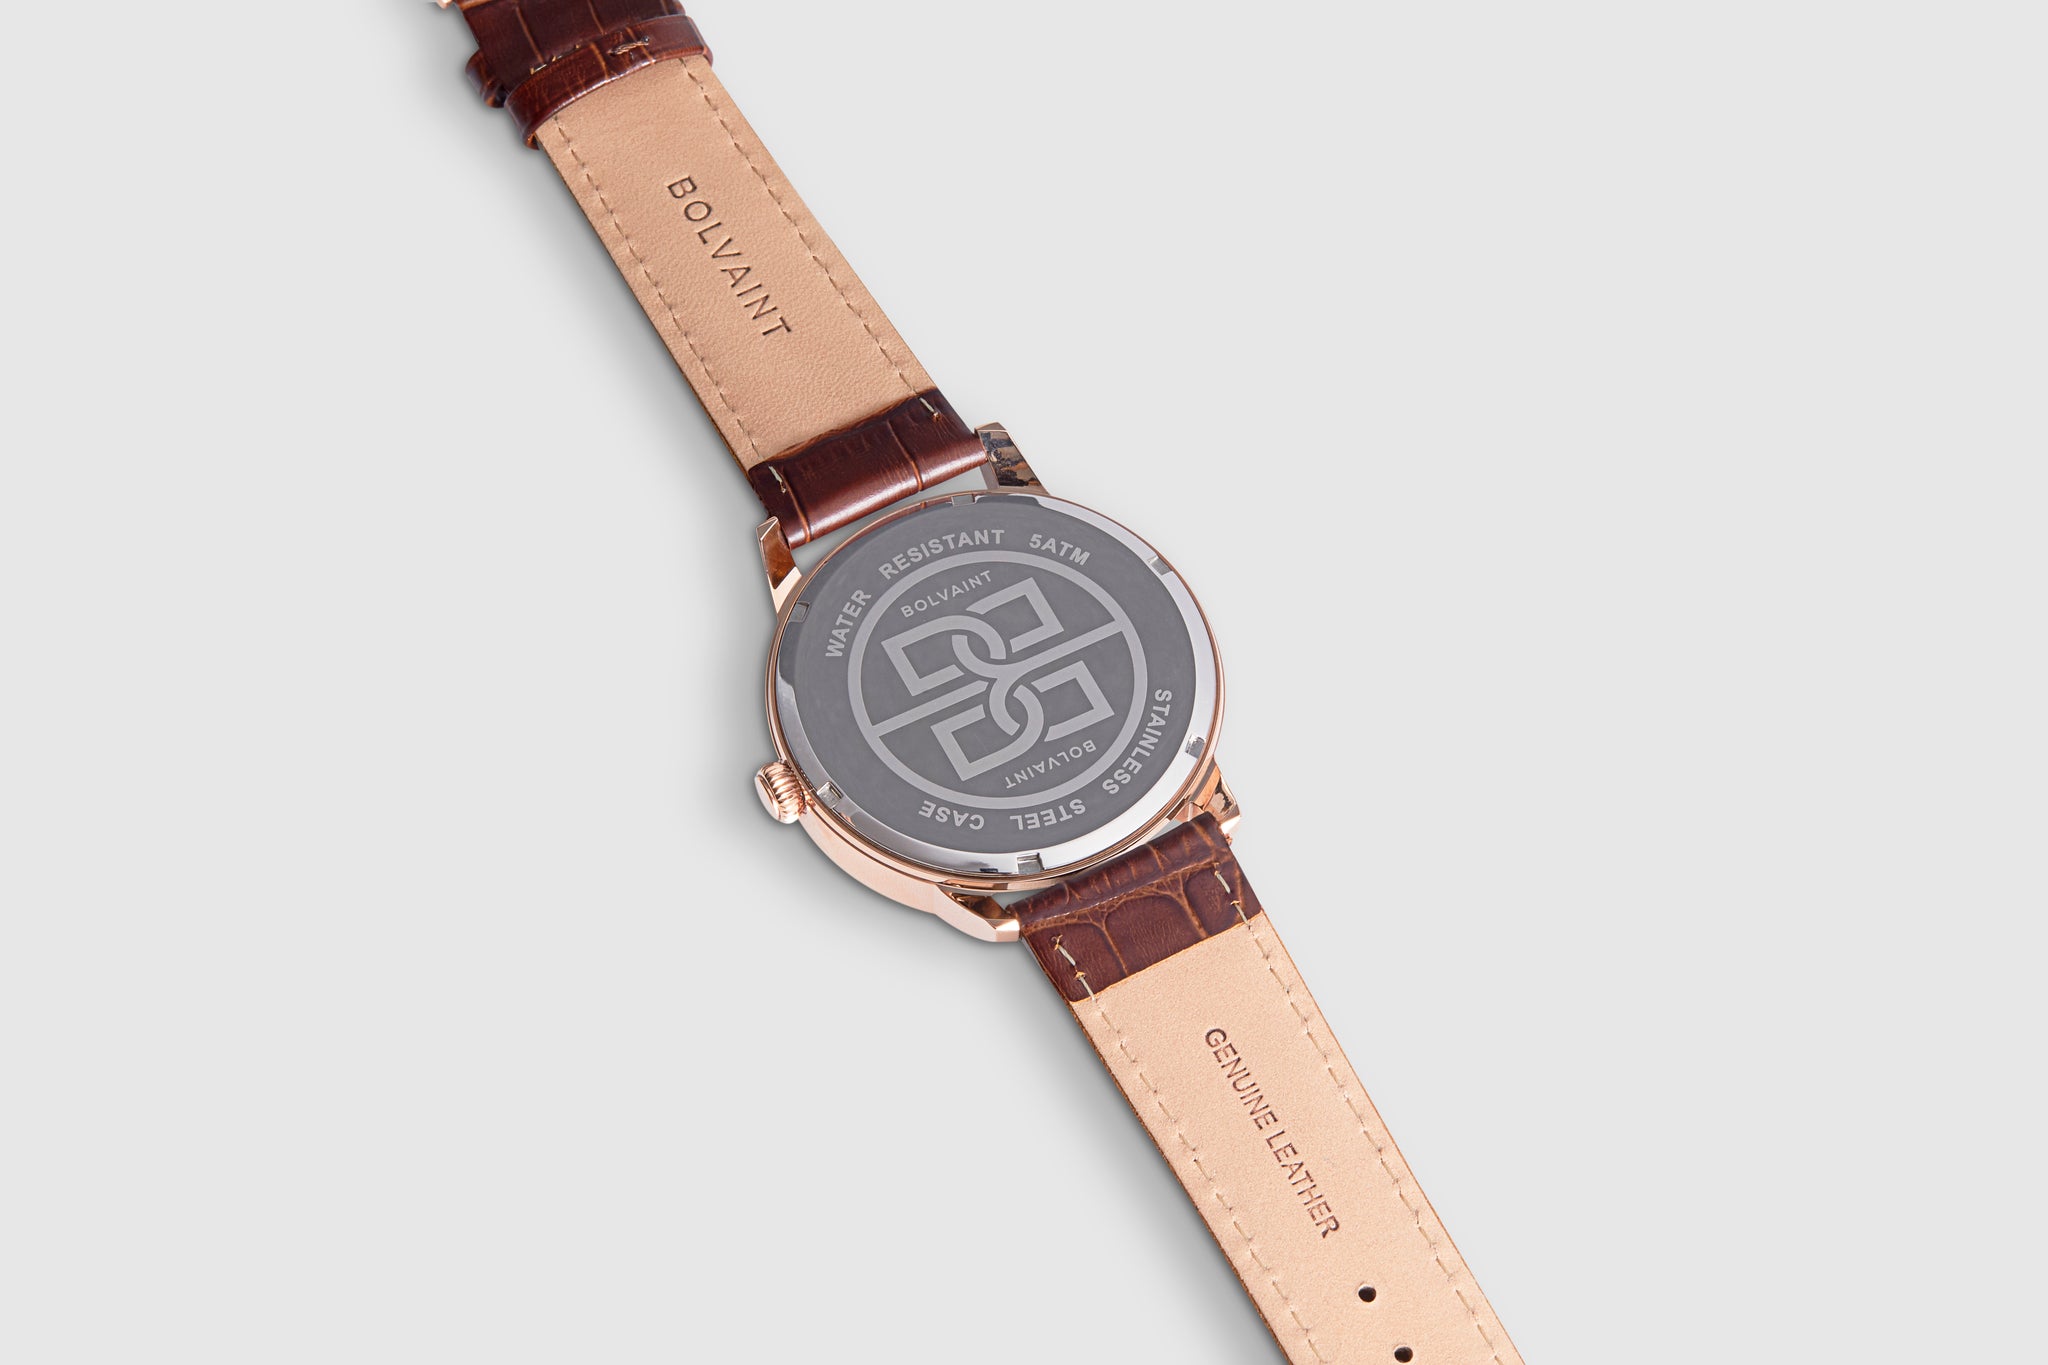 The Mallory Blanc in Rose Gold